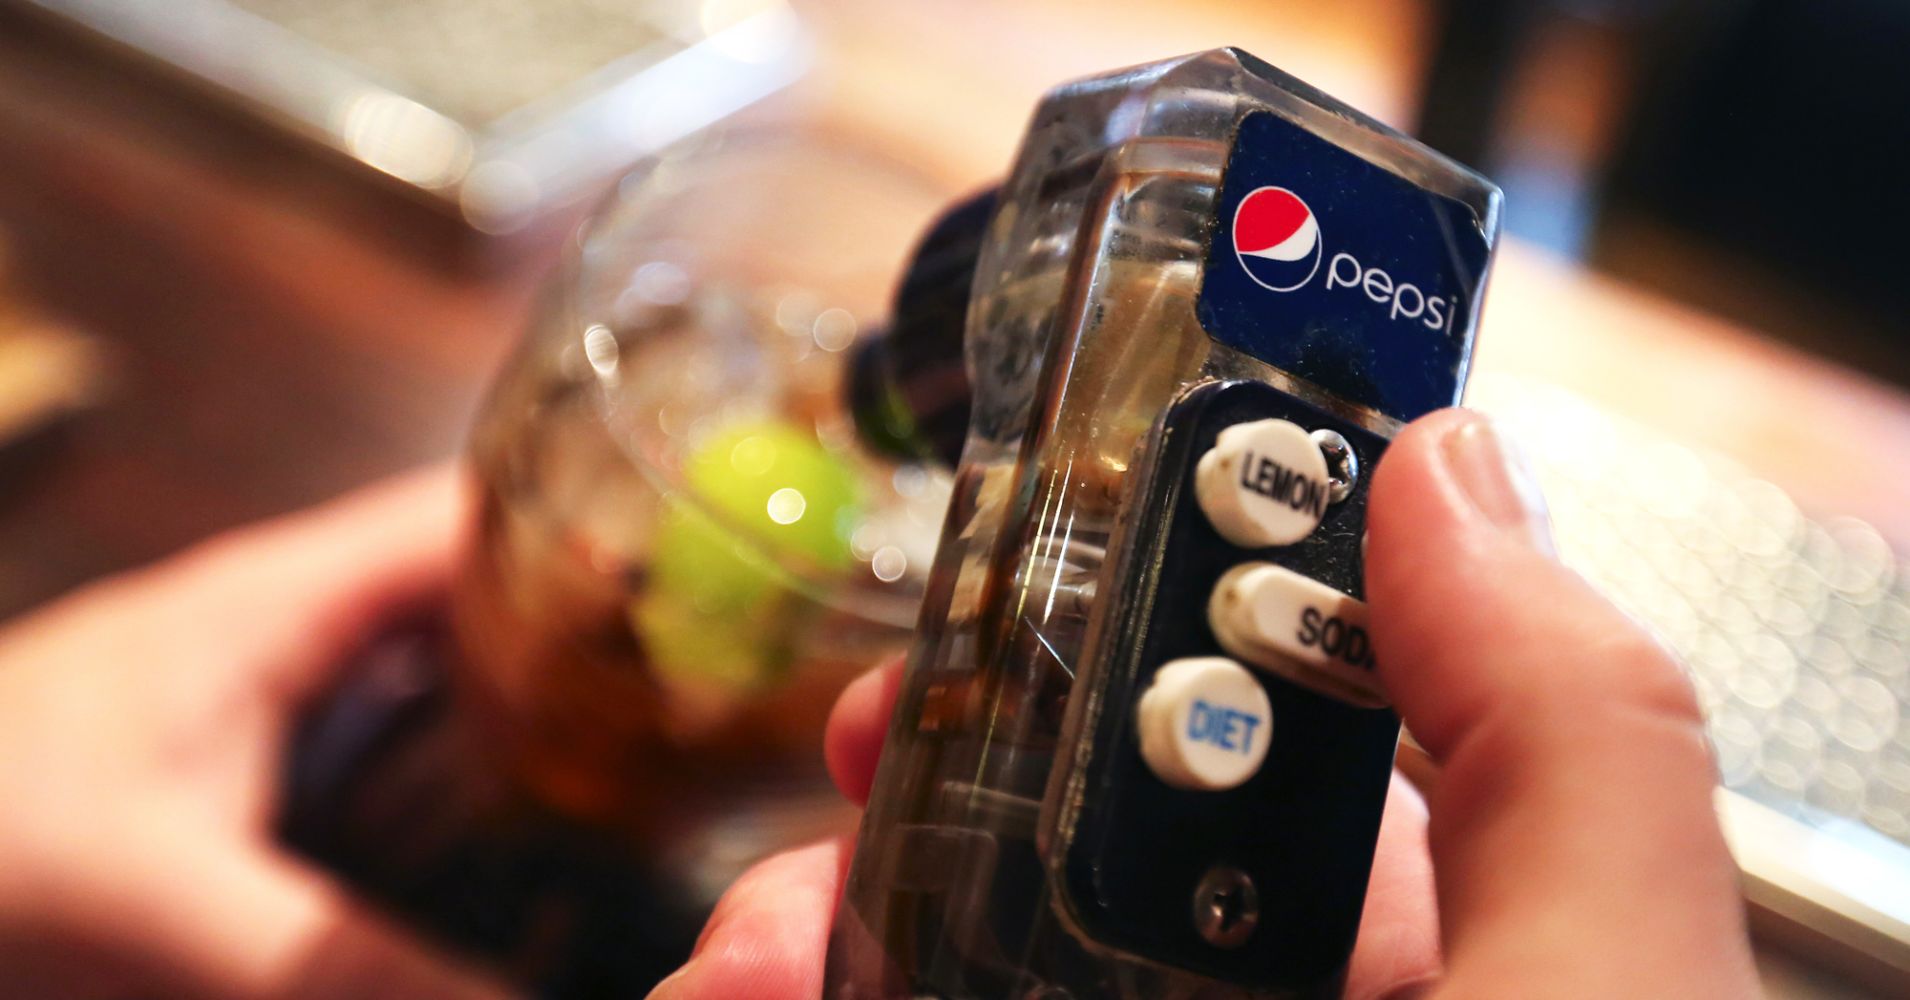 Pepsico Expects Earnings To Decline In 2019 As It Invests To Boost Its Sales Growth photo